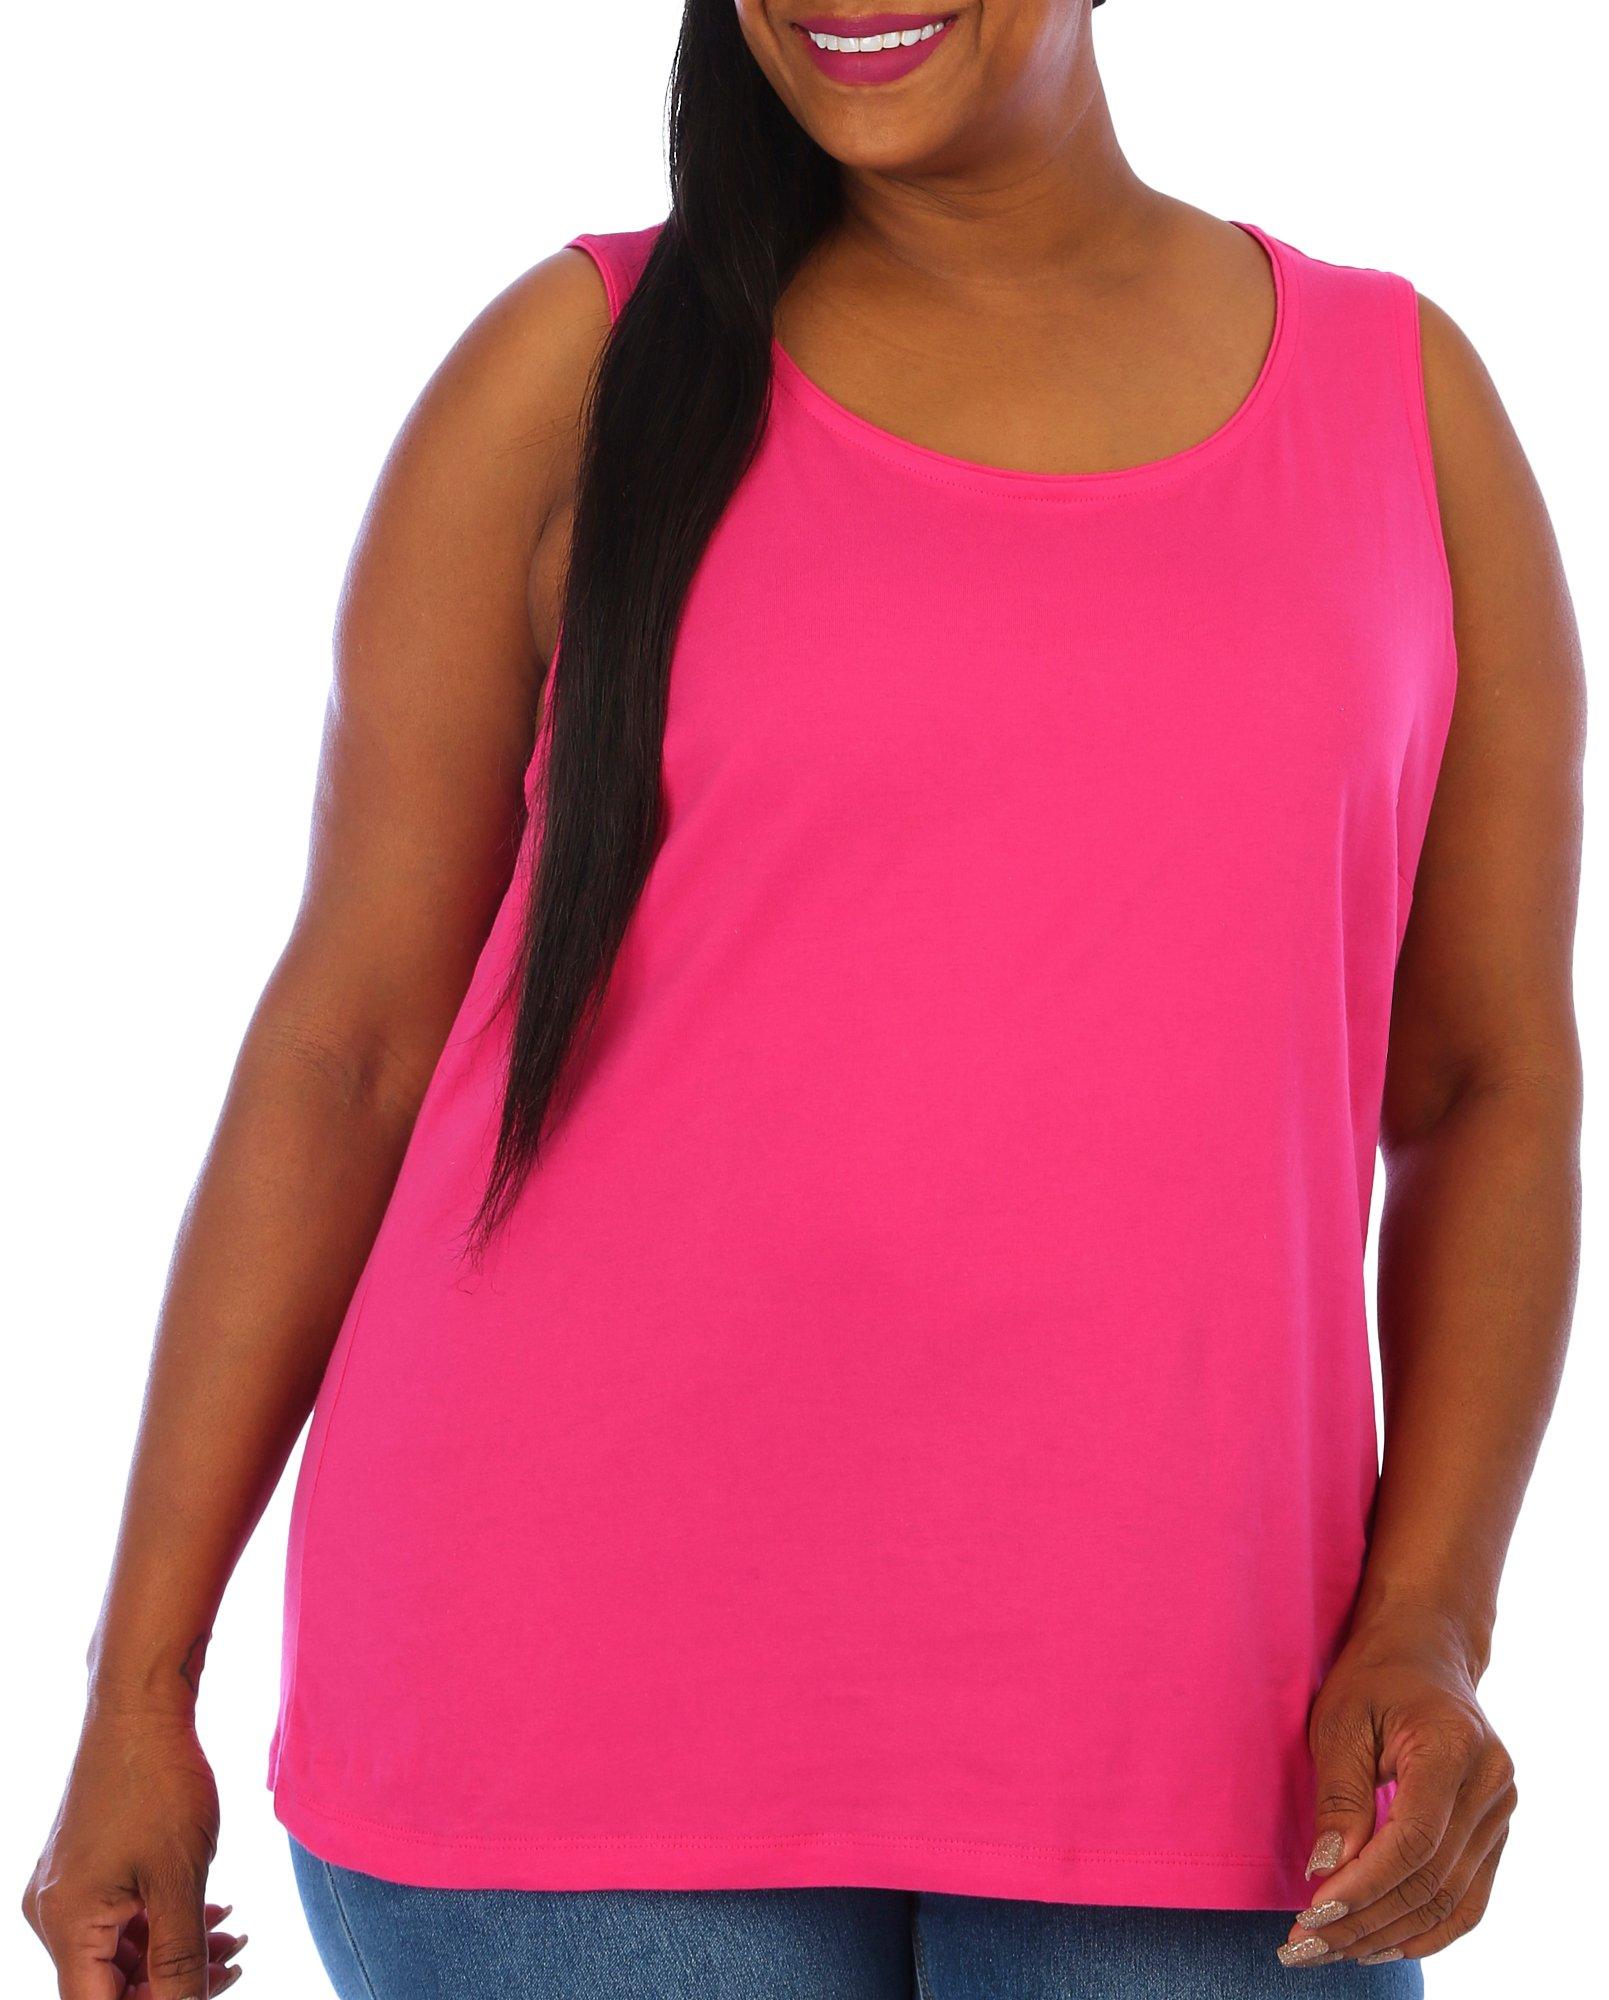 Coral Bay Plus Solid Scoop Neck Sleeveless Top